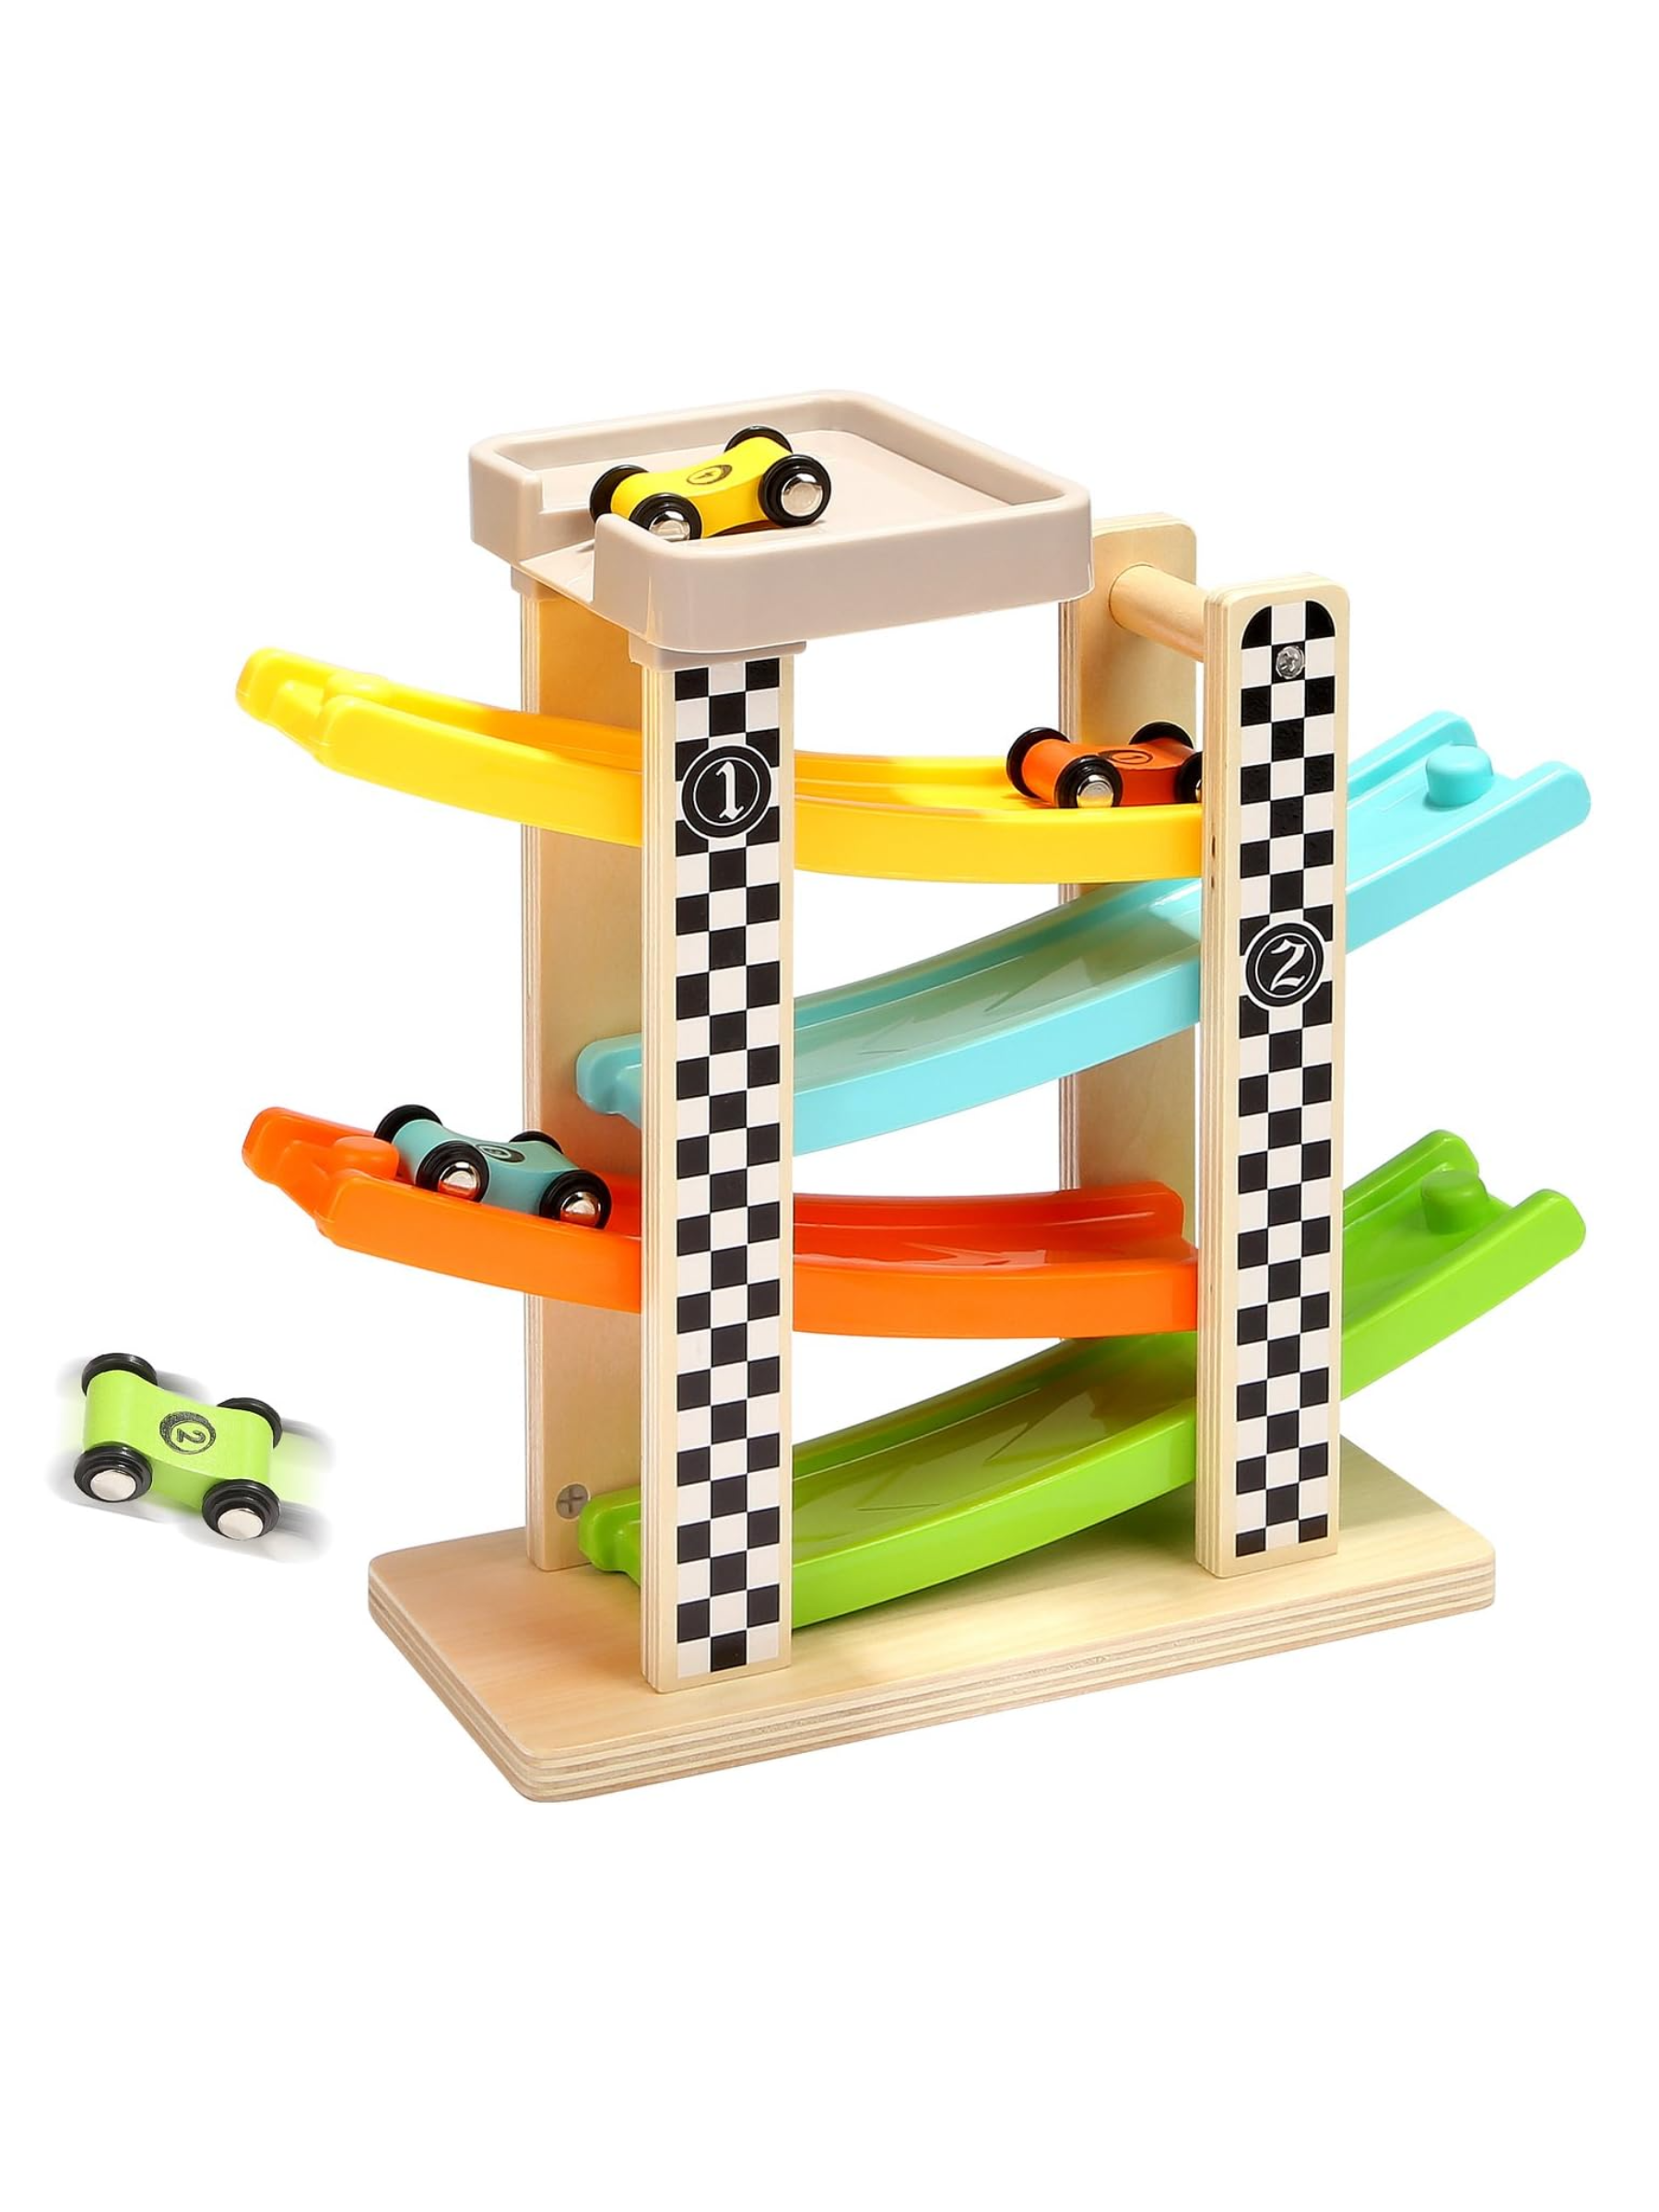 This toy has been an Amazon-bestseller for years. It’s simple yet colorful and engaging—perfect for the one-year-old in your life. All they have to do is tip one of the included four mini cars off of the parking deck up top, then watch it zig-zag down the ramp. <br> <br> <strong>What our expert says:</strong> “It’s smaller than it looks, but that’s part of the beauty of it. Nobody wants a giant race track overtaking their playroom and it’s still incredibly engaging. I like that the paint is all non-toxic, too.” — Earley $22, Amazon. <a href="https://www.amazon.com/TOP-BRIGHT-Toddler-Gifts-Wooden/dp/B072X7CYH4">Get it now!</a><p>Sign up for today’s biggest stories, from pop culture to politics.</p><a href="https://www.glamour.com/newsletter/news?sourceCode=msnsend">Sign Up</a>